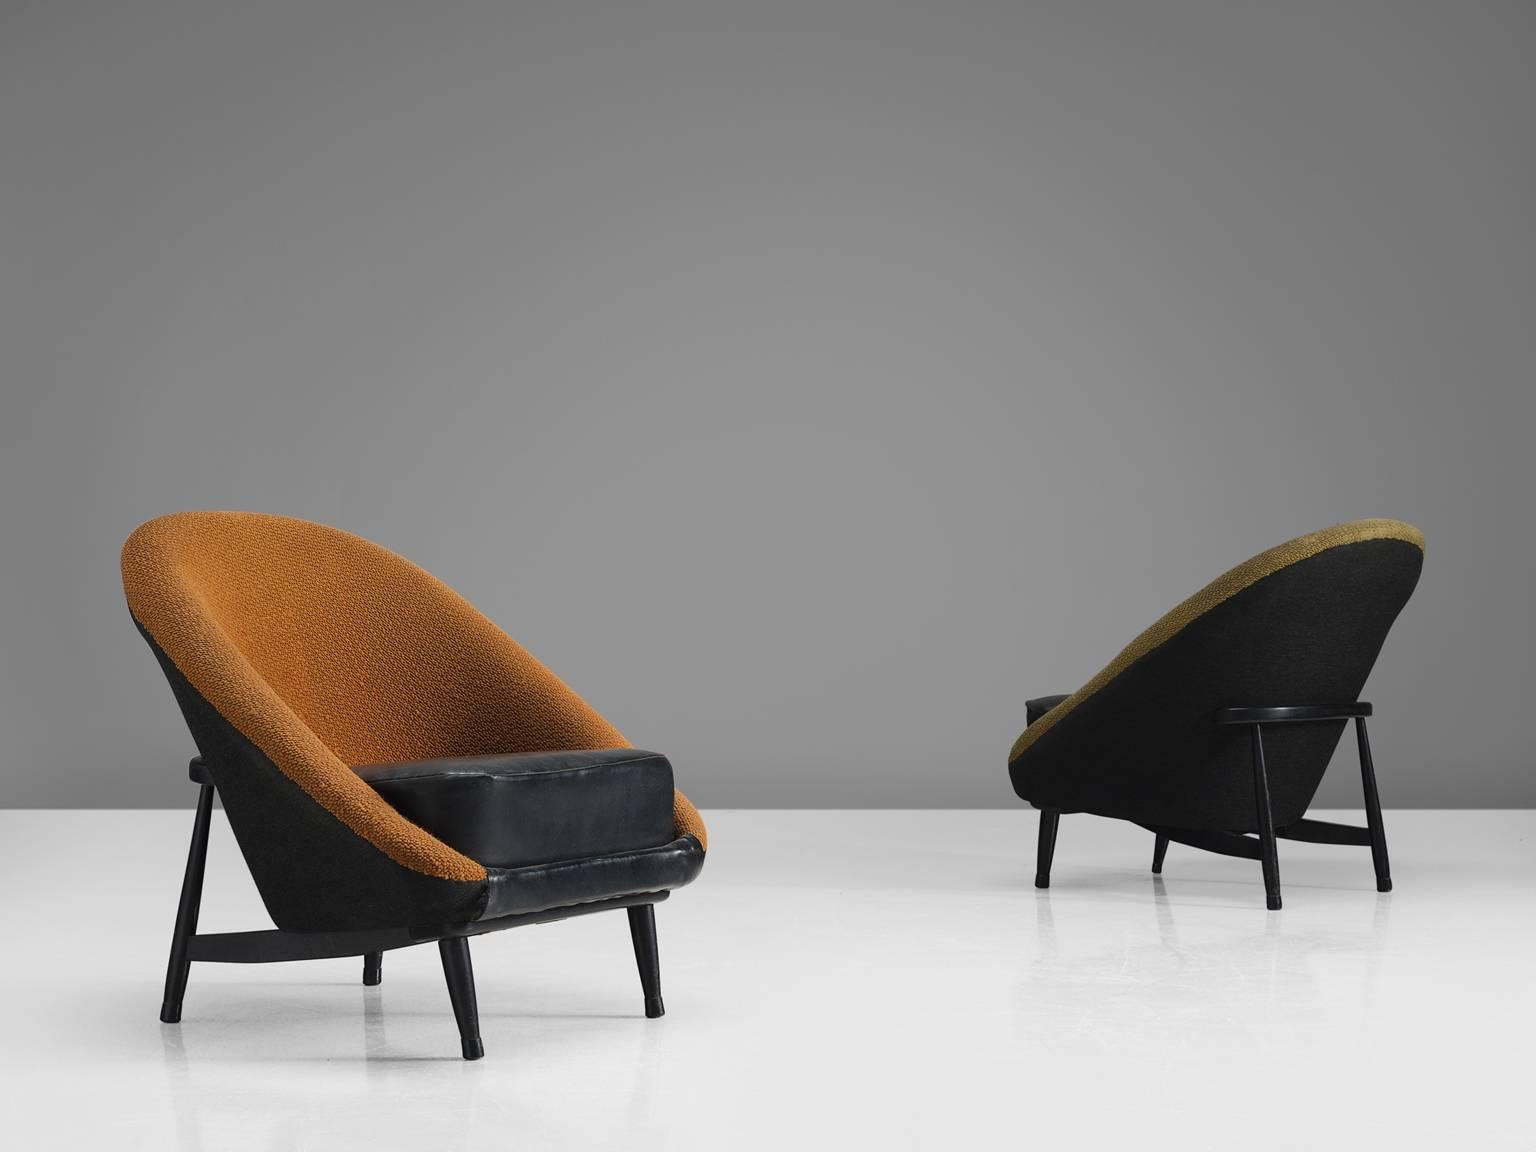 Theo Ruth for Artifort, set of two armchairs model 115, fabric, beech, 1959.

This ocre and olive grey armchairs by Theo Ruth (1915-) for Artifort feature a very strong design and are part of the midcentury design collection. The model 115 lounge